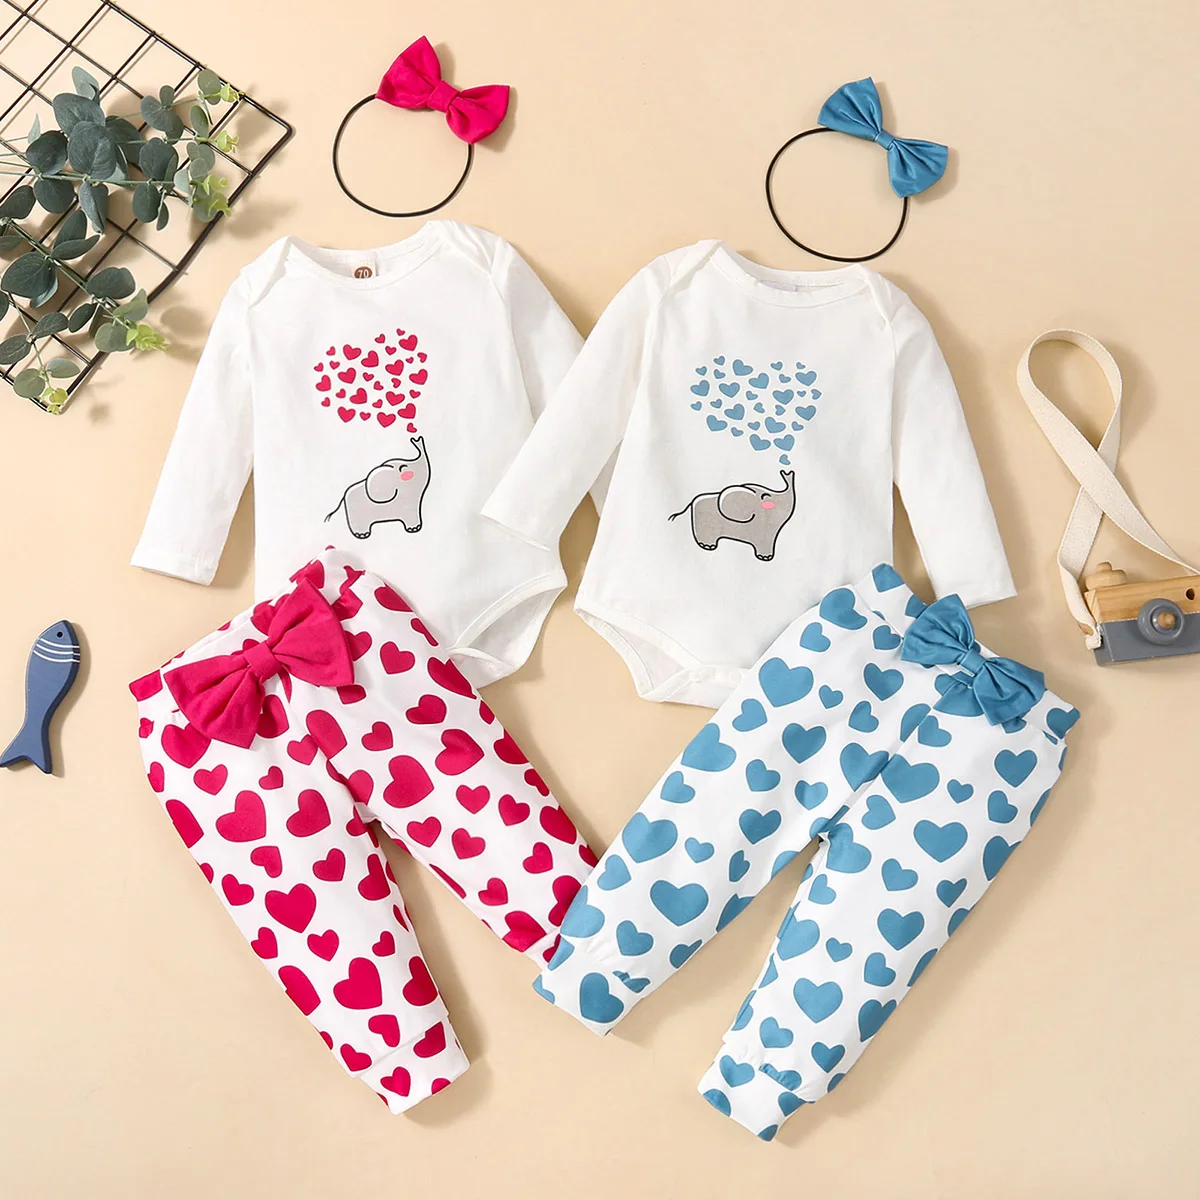 

hibobi Newborn Baby Clothes Baby Girl Long Sleeve Romper & Polka Dot Printed Pants With Headband 3pcs Autumn Outfit Set for Kids